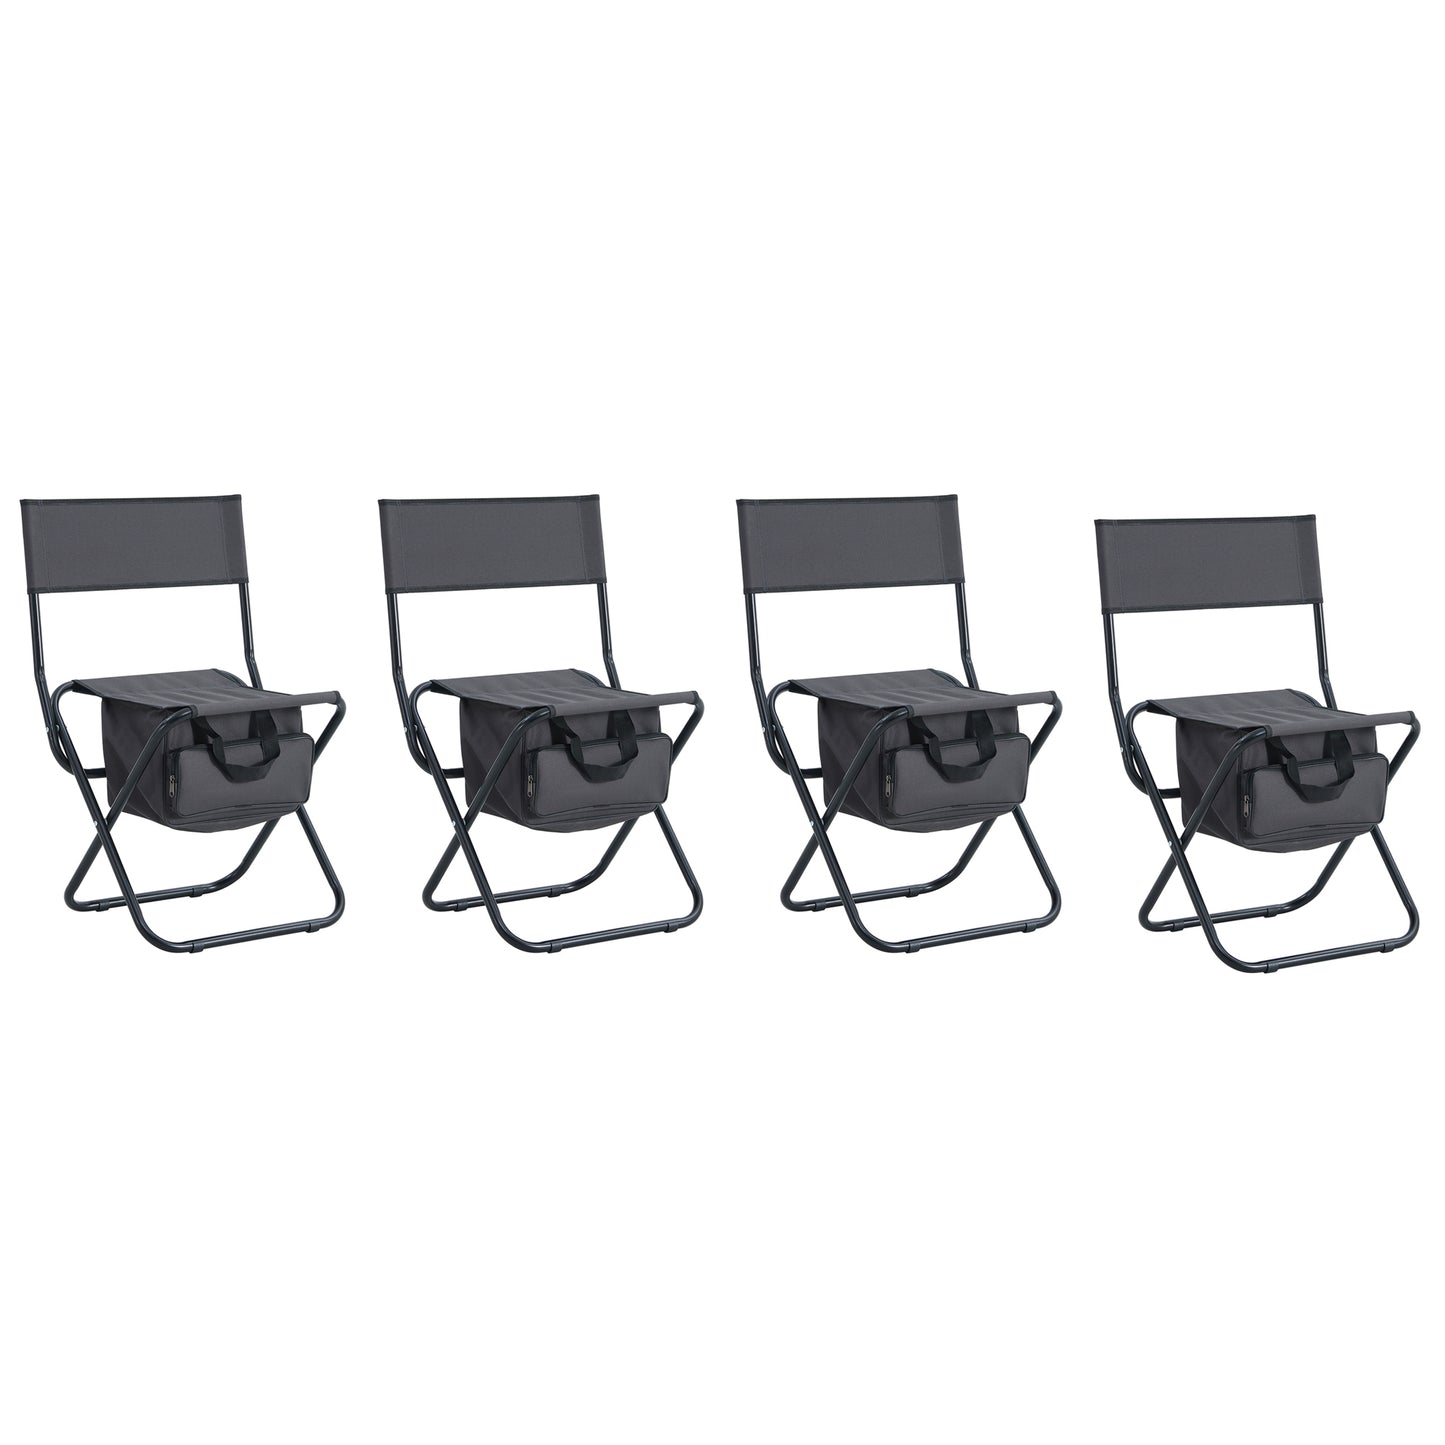 Set of 5, Folding Outdoor Table and Chairs Set for Indoor, Outdoor Camping, Picnics, Beach,Backyard, BBQ, Party, Patio, Black/Gray